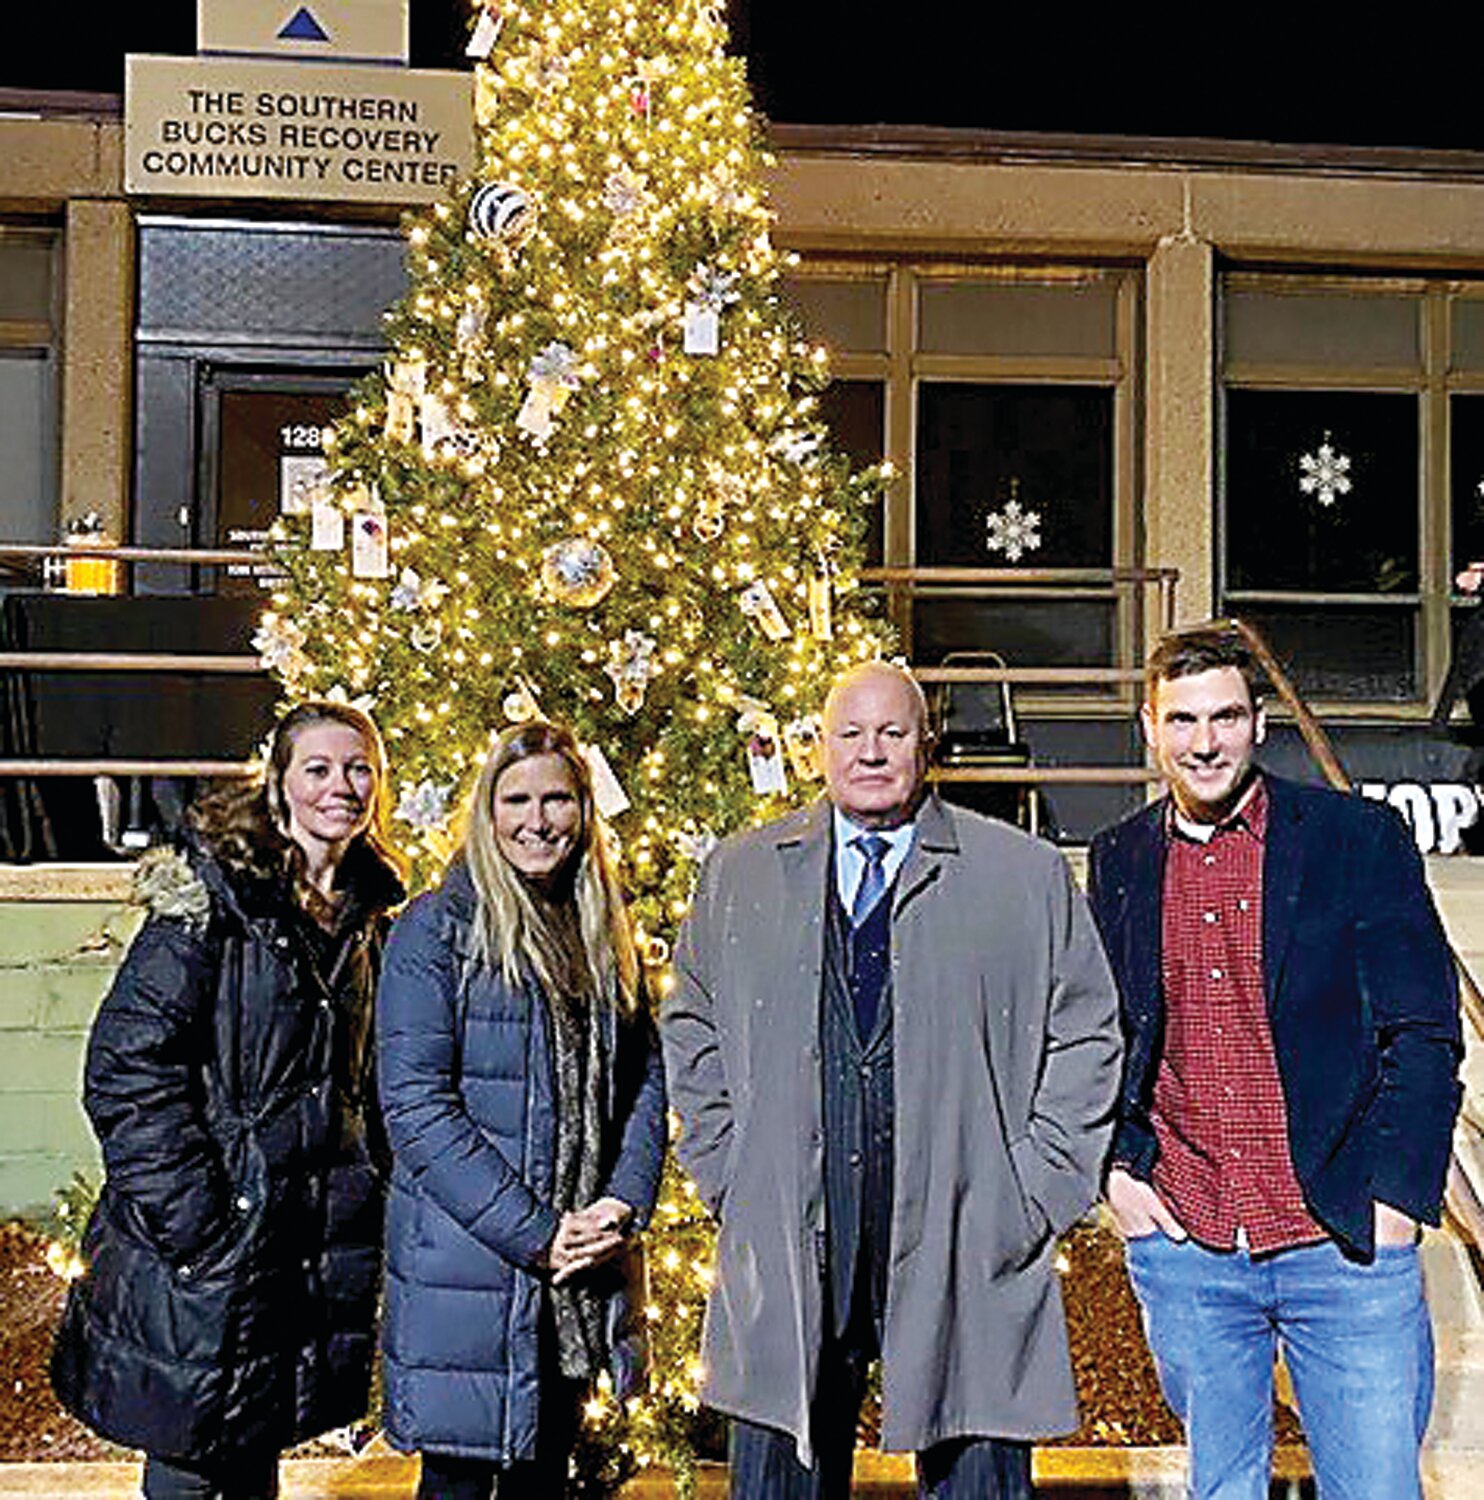 Board Members of The Council of Southeast PA present at the Dedication of the Tree of Hope included, from left, Patricia Nye, Julie Smith, Harry Dannehower and Matt Bartelt.